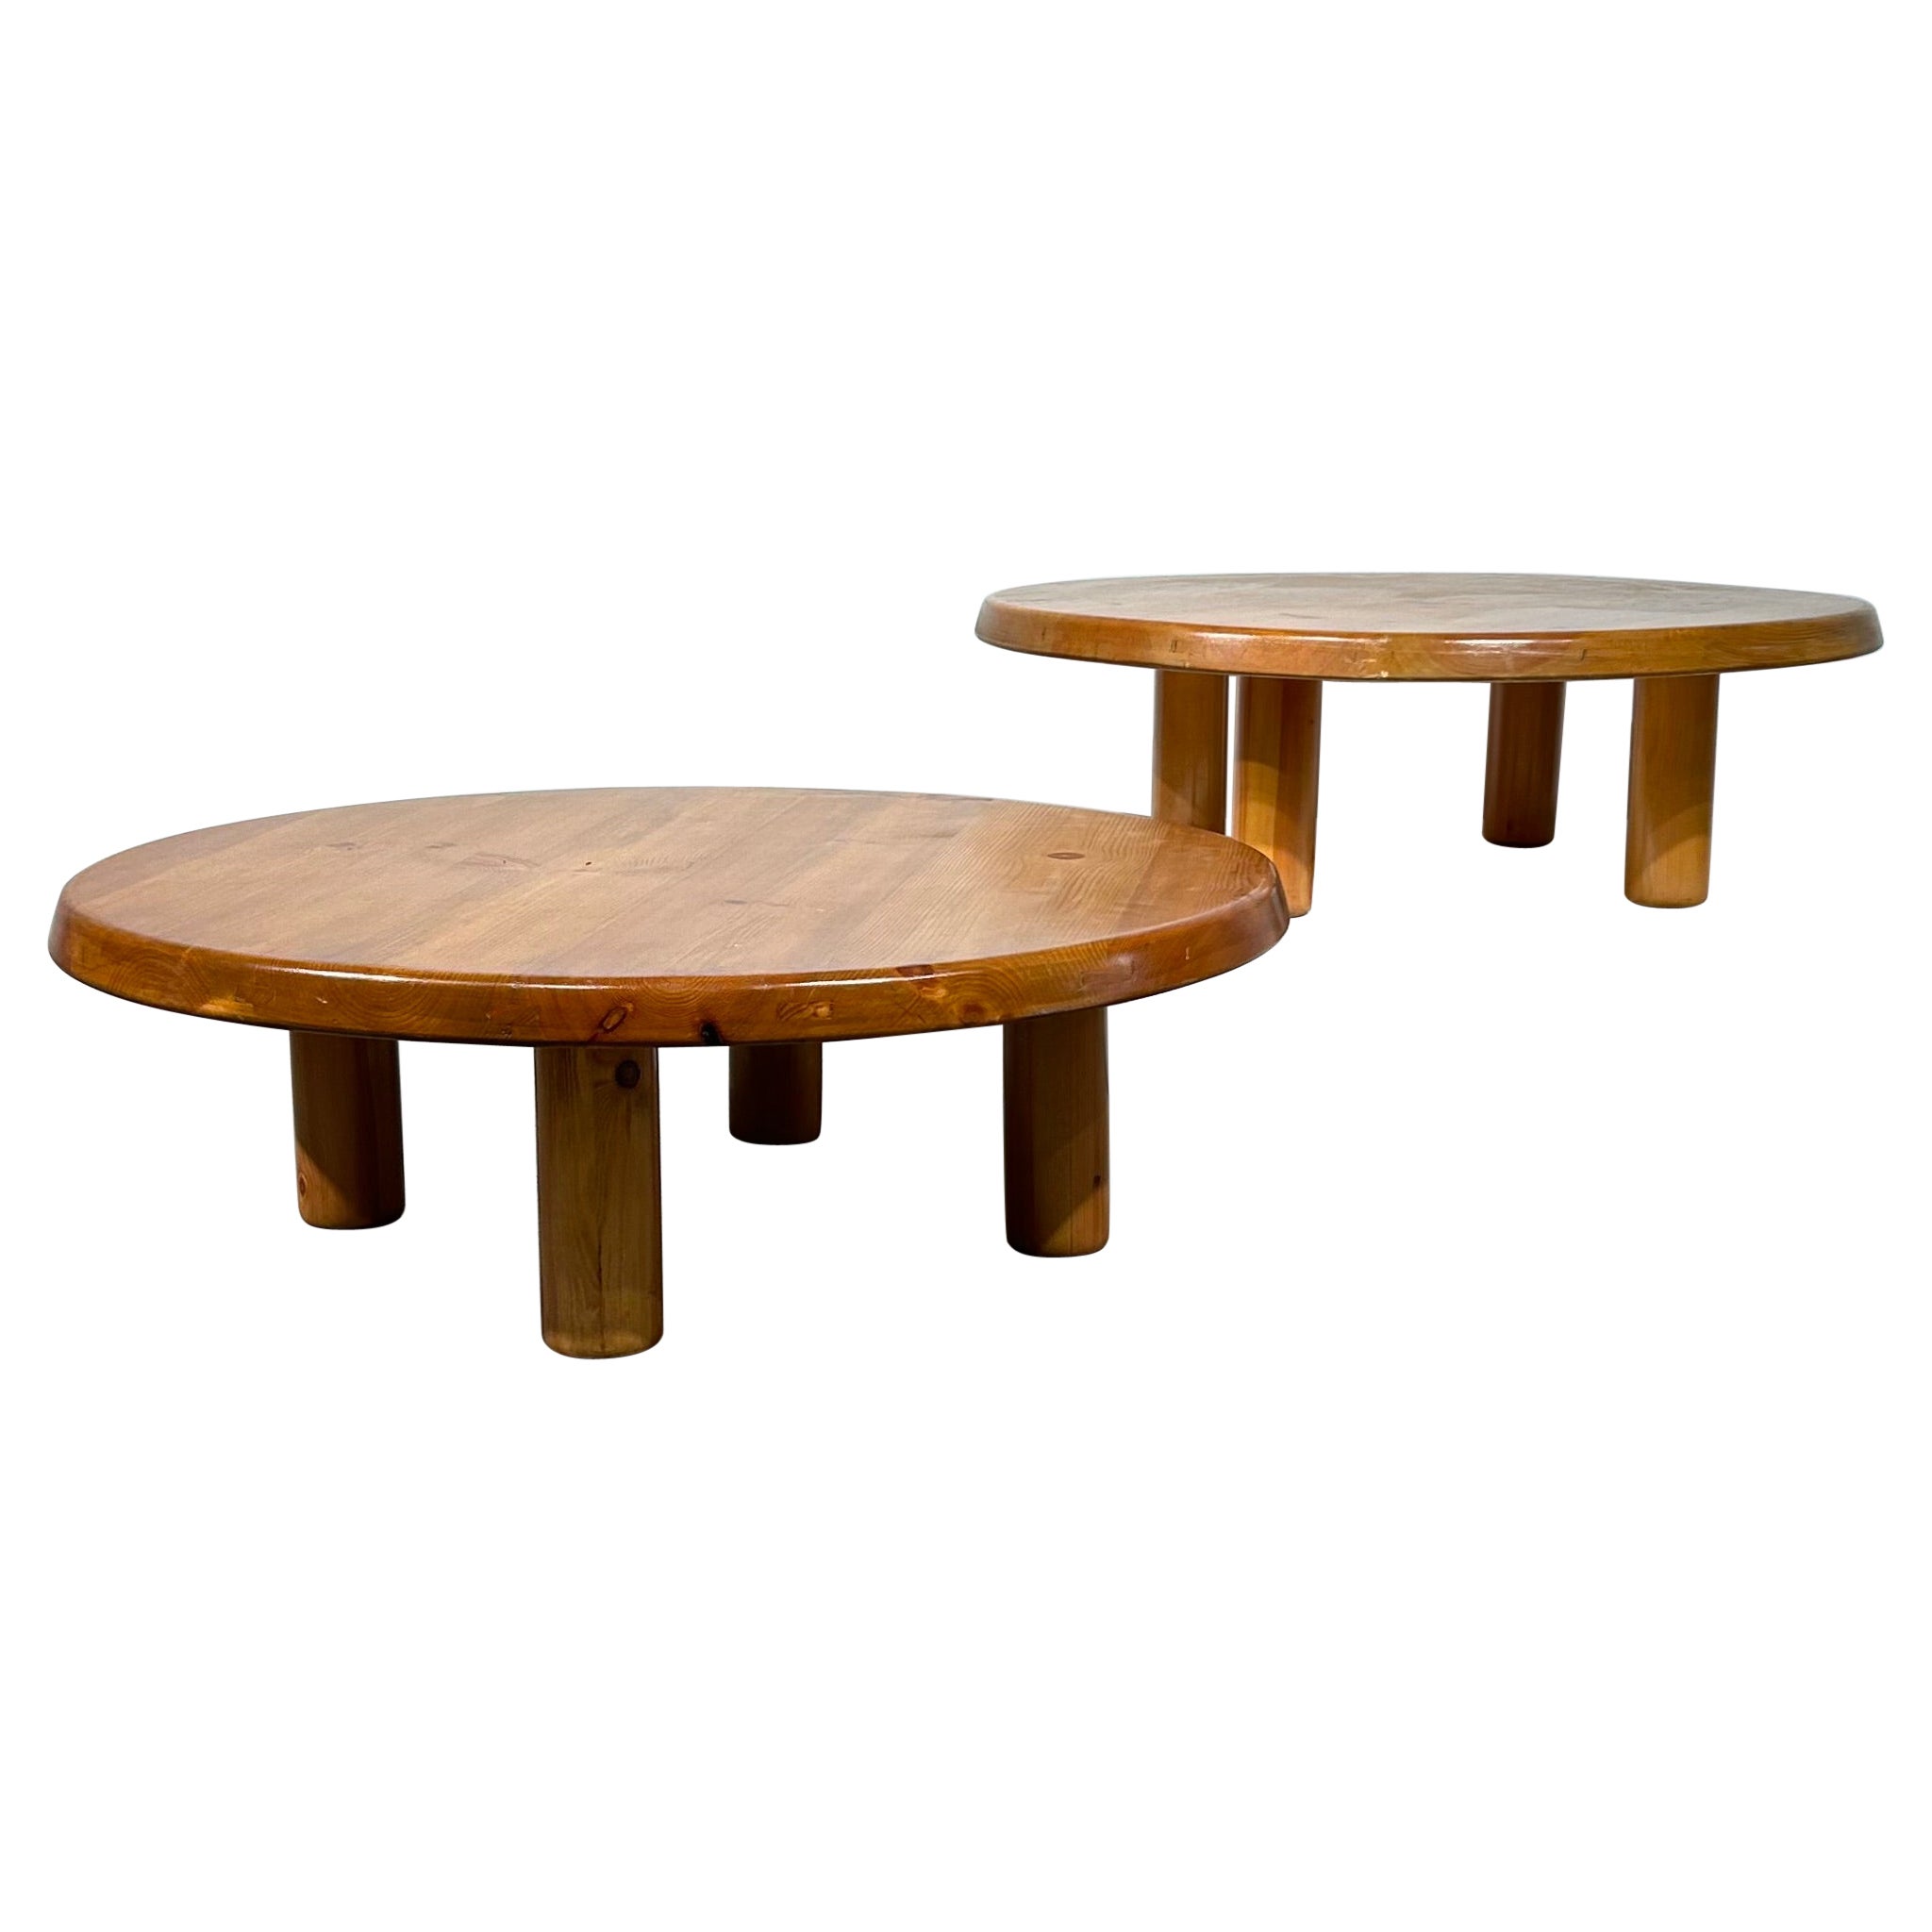 Set of 2 Charlotte Perriand round coffee table